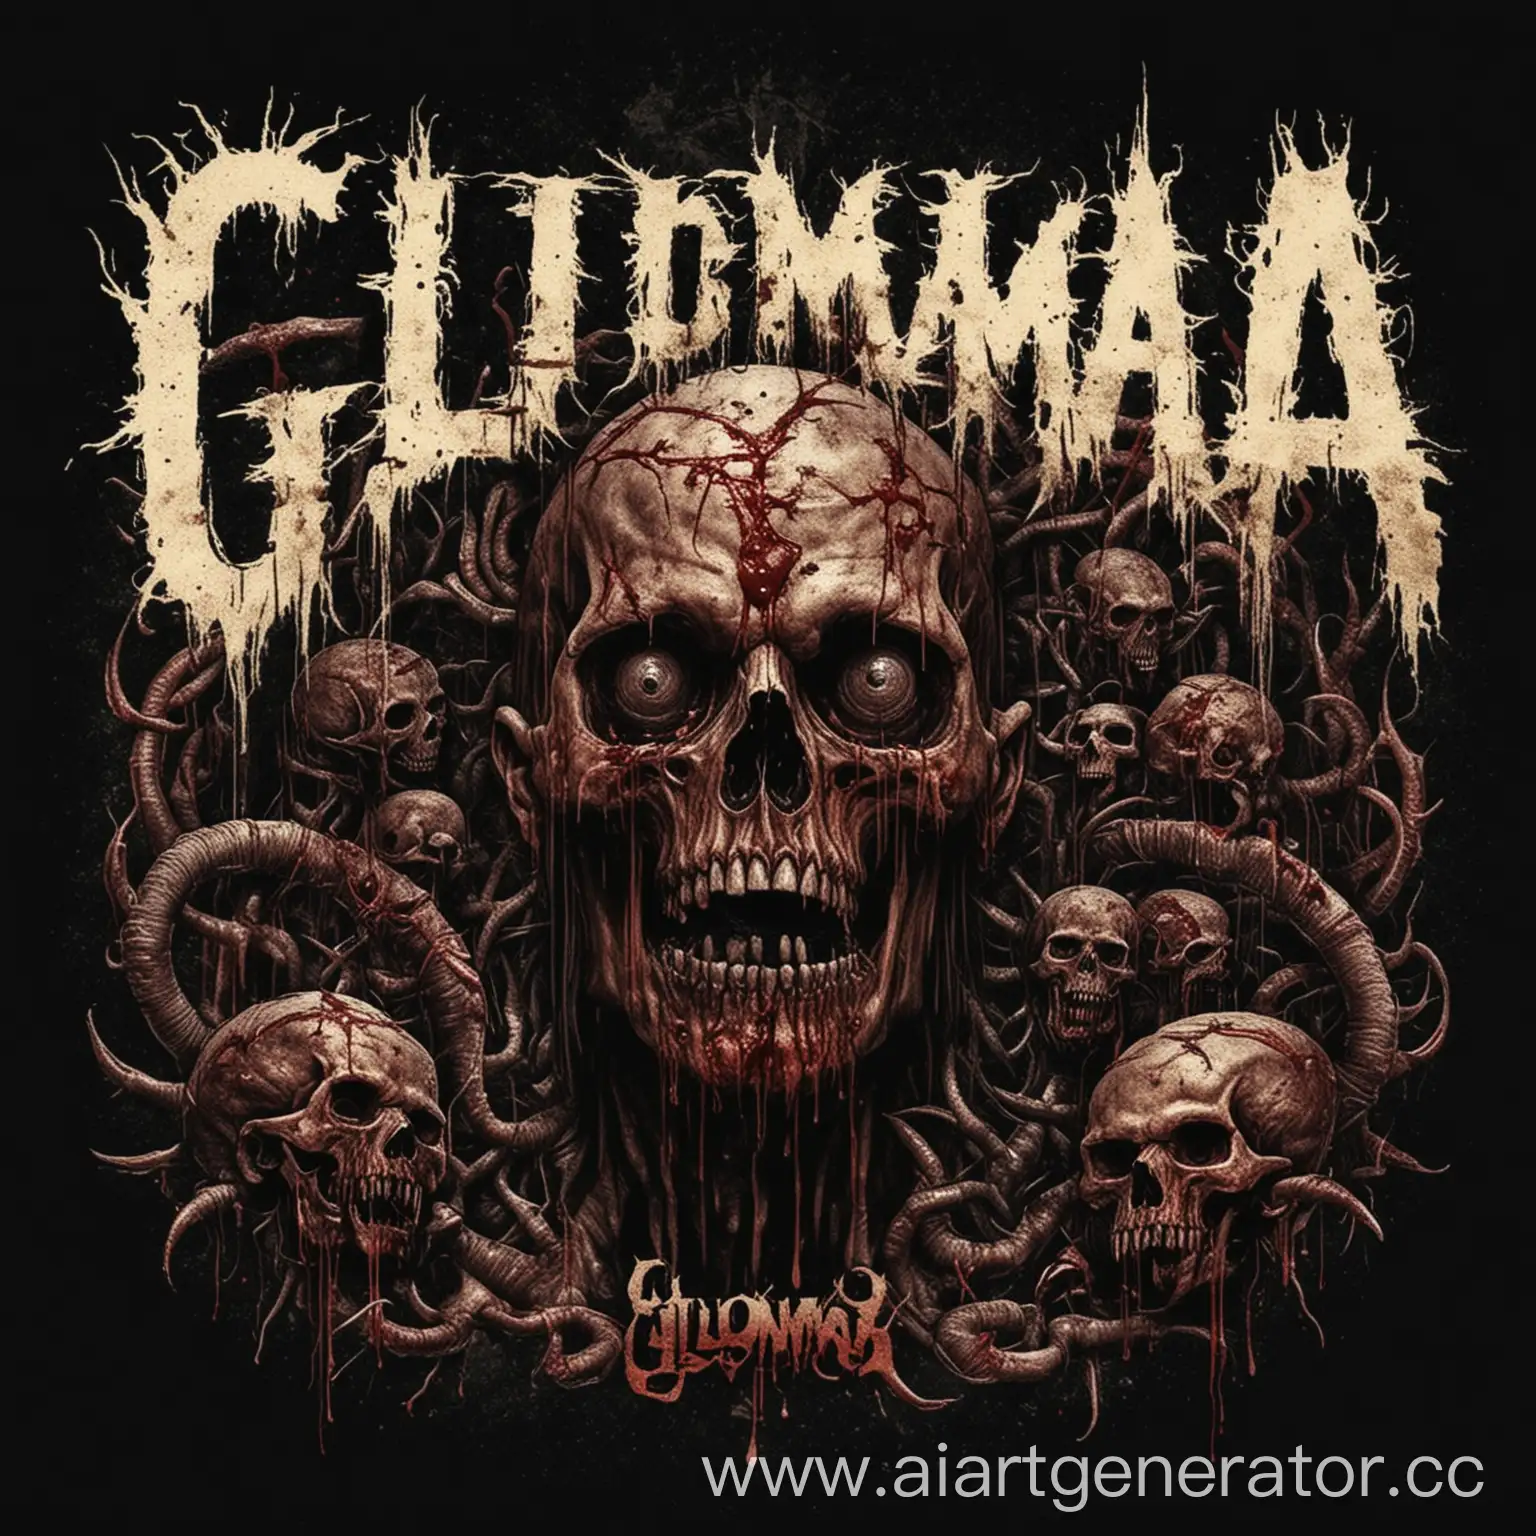 Unreadable-Logo-Design-for-Grindcore-Band-Glioma-with-Grotesque-and-Dark-Elements